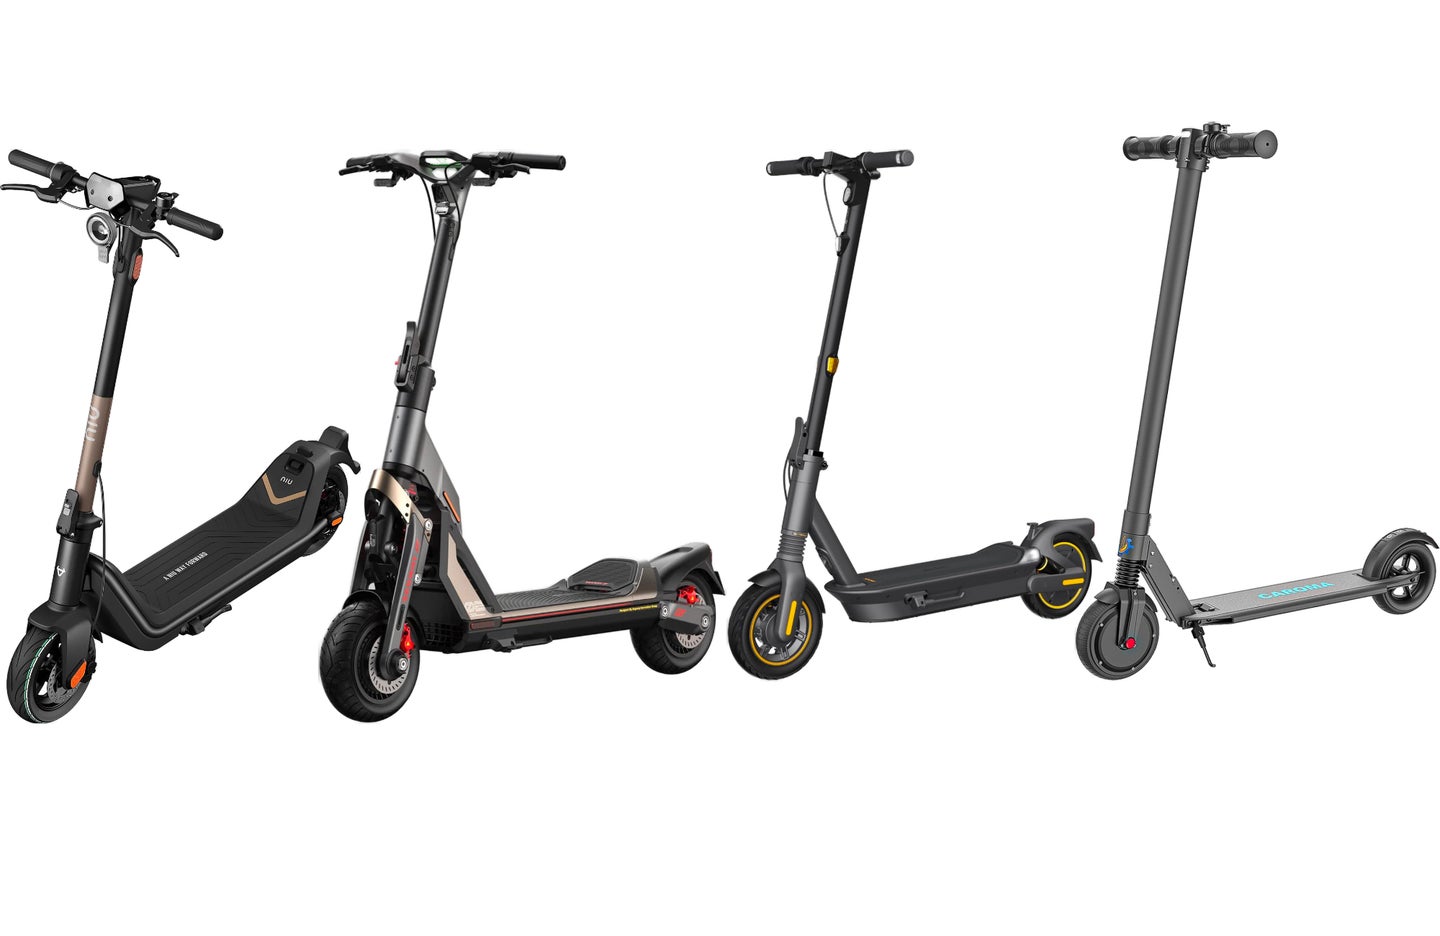 The best electric scooters for adults